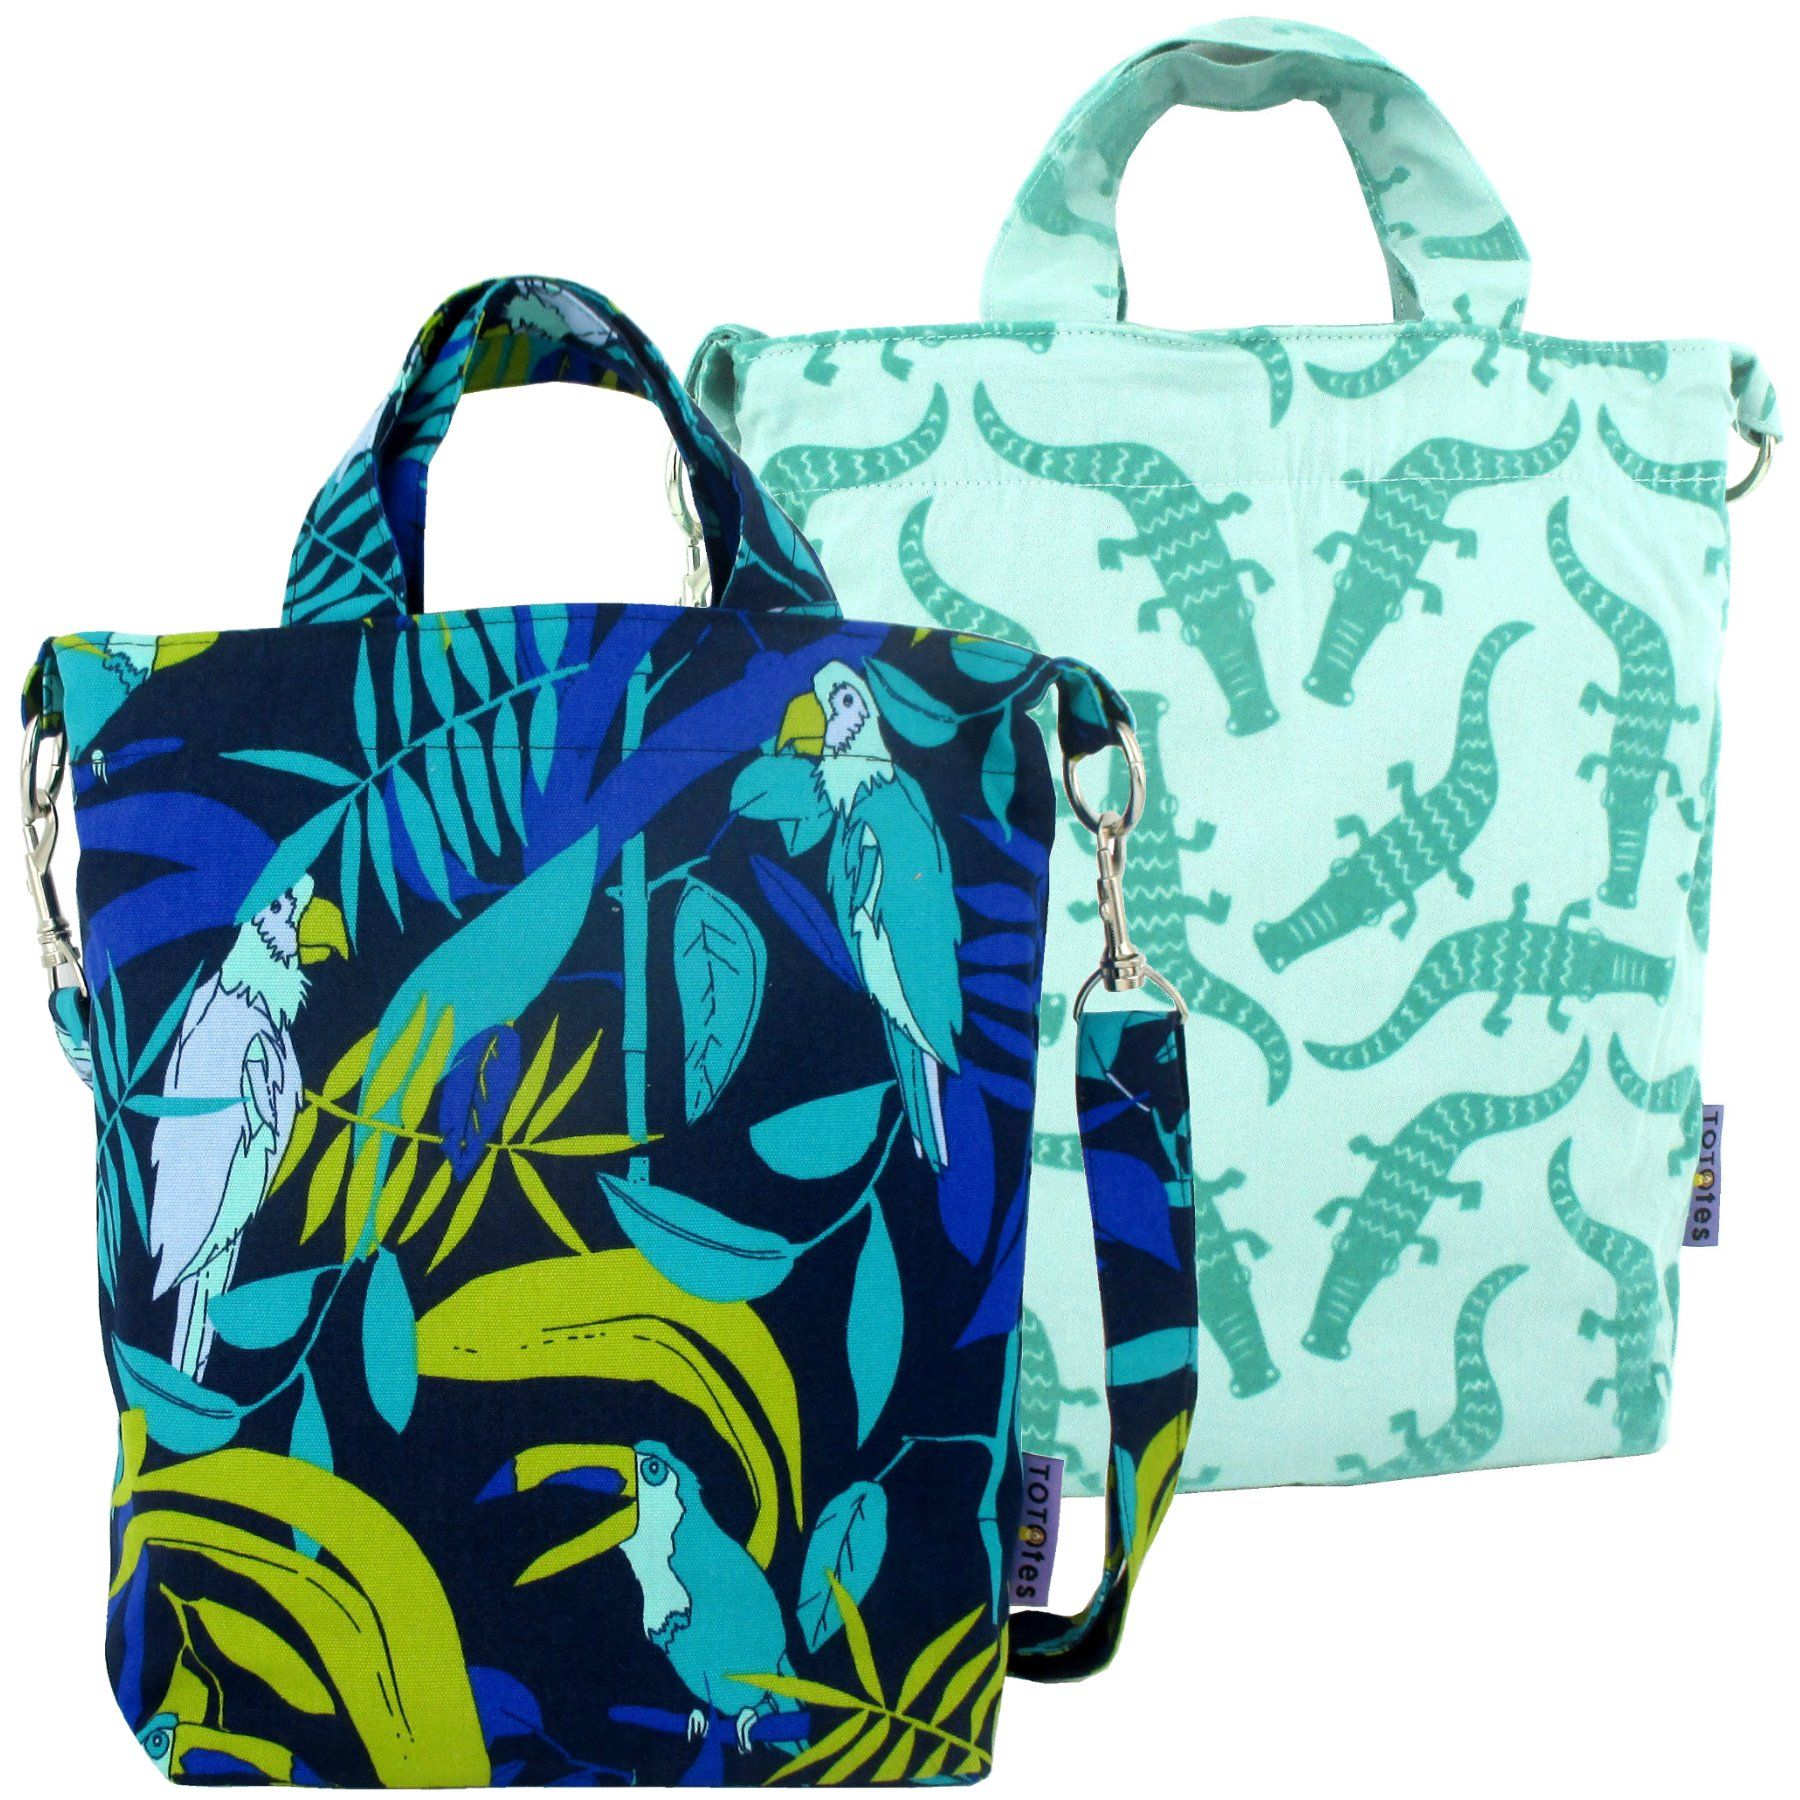 This jungle inspired bag features a blue green print made up of parrots and toucans against tropical leaves in the background.